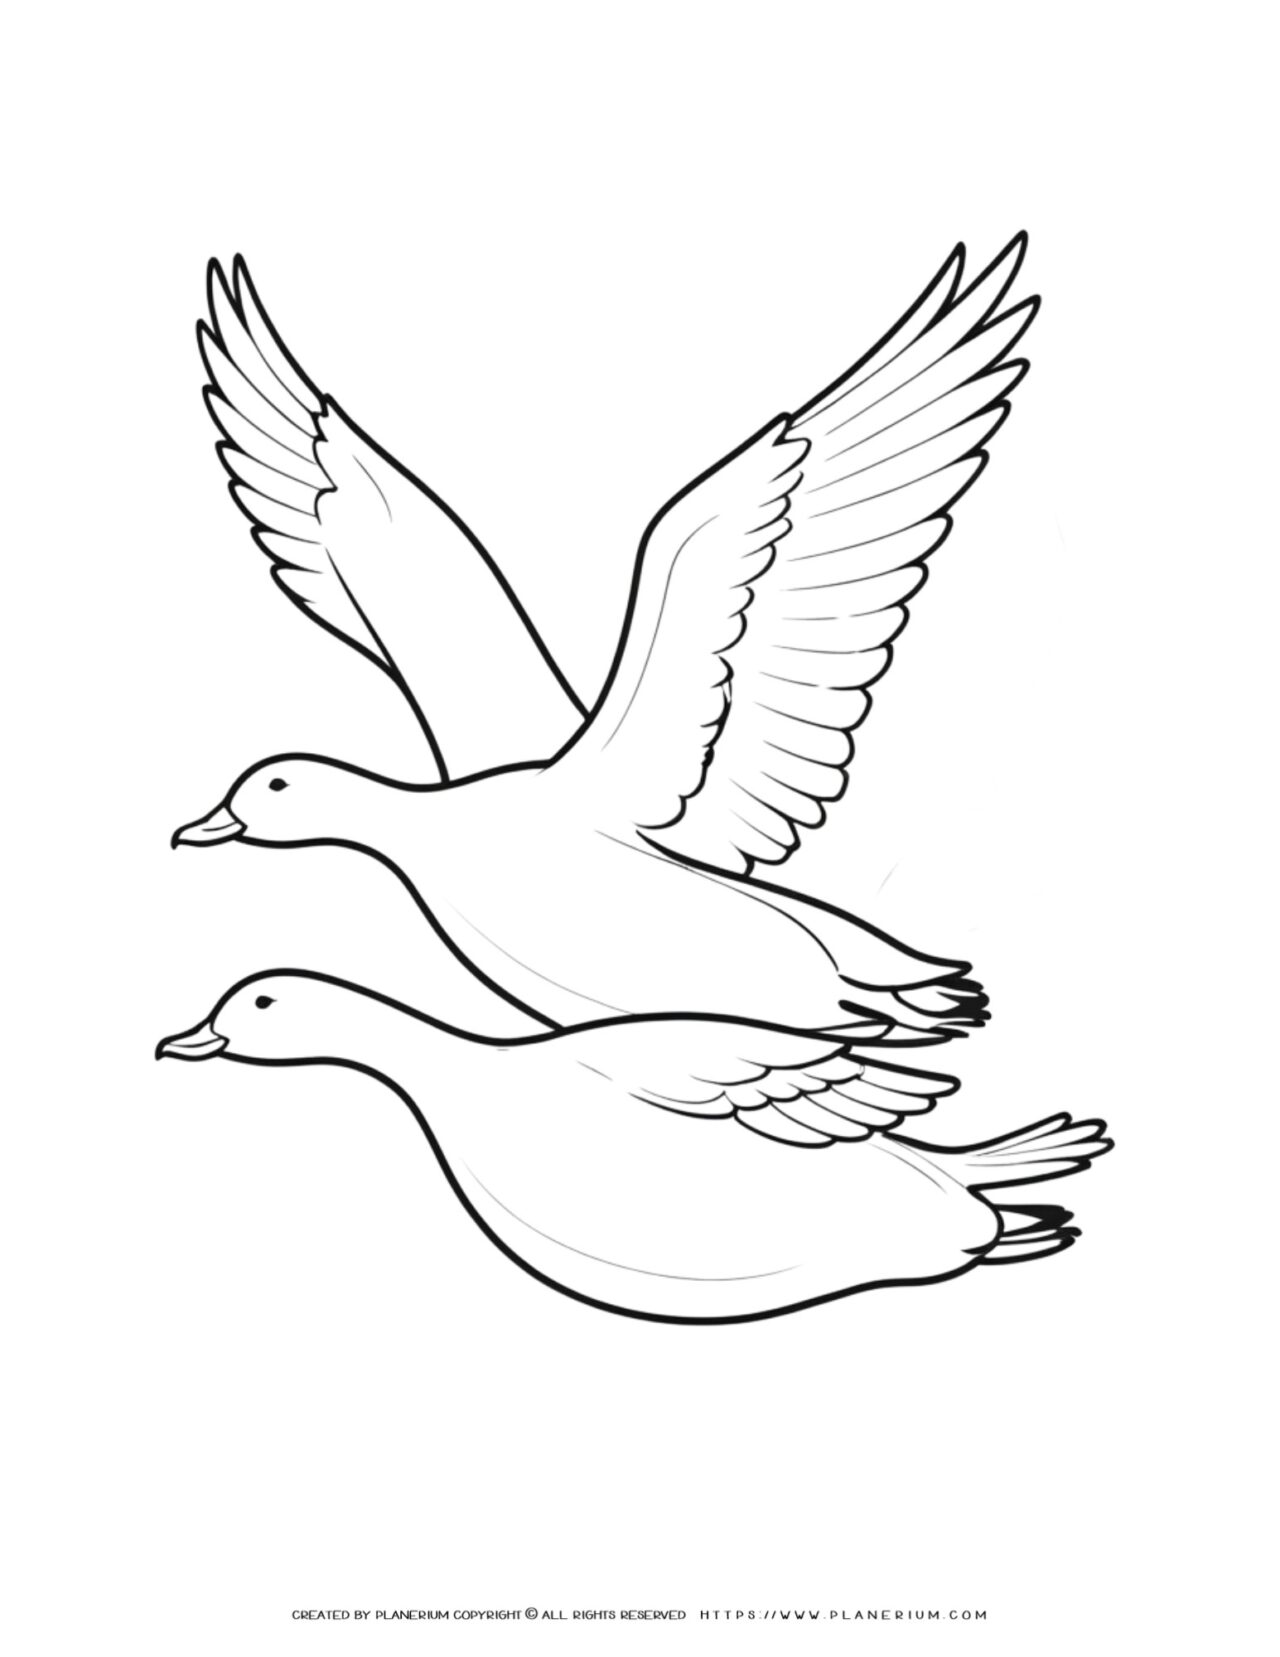 two-flying-geese-illustration-coloring-page